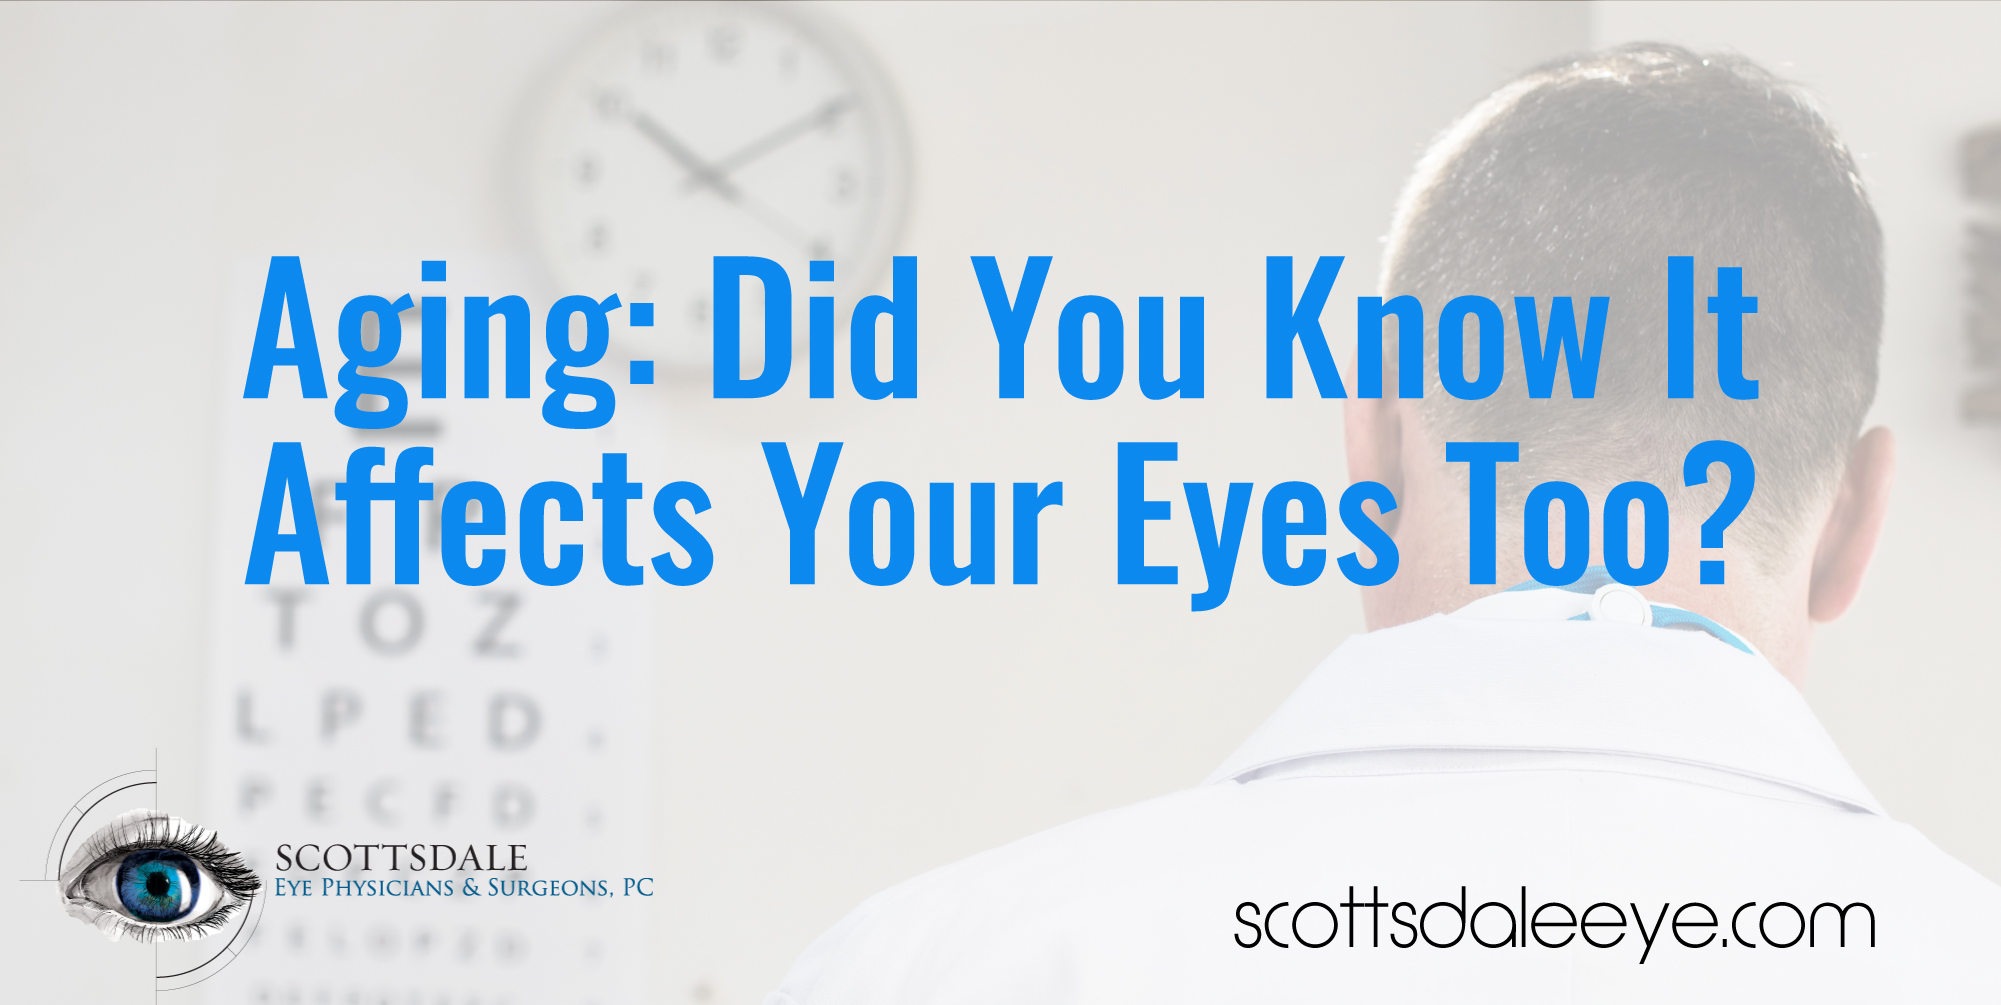 Aging: Did You Know That It Affects Your Eyes Too?